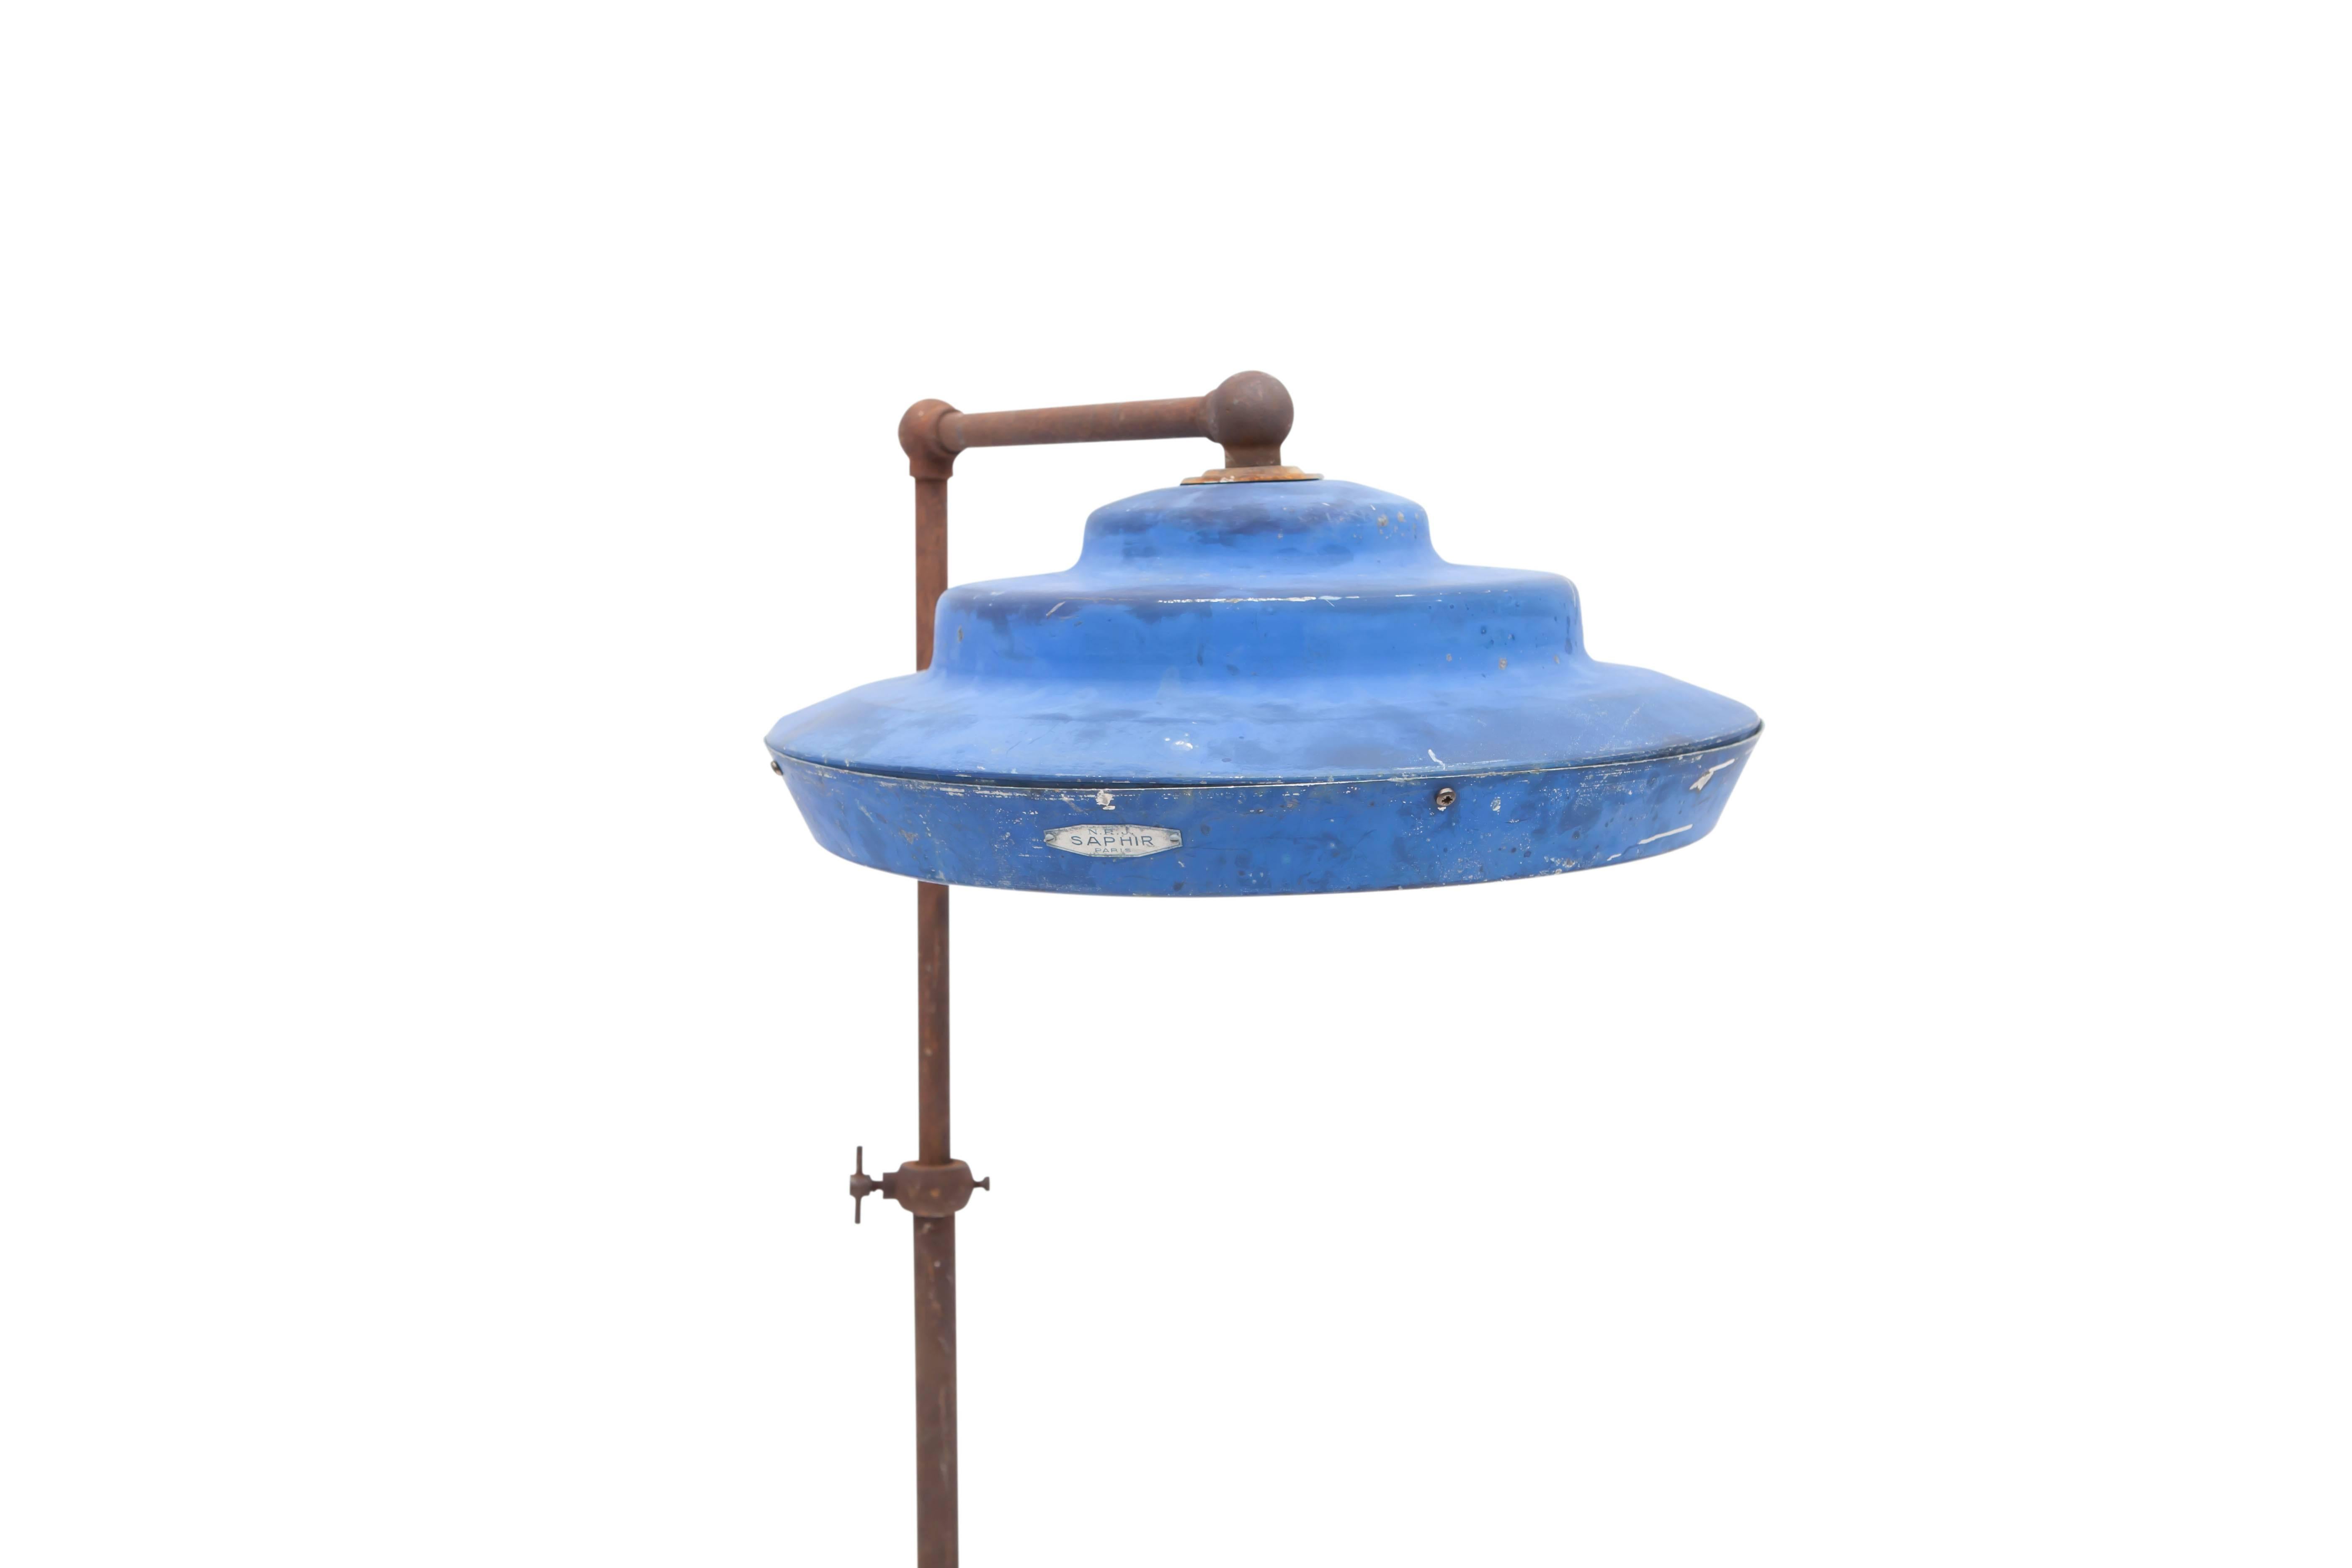 Industrial floor lamp Saphir Paris with original blue shade.
Mounted on Tripod iron base.
An early 20th century 'machine age' piece in original condition.
Great patina
Measure: H 142 cm x D 53 cm x W 43 cm .

   